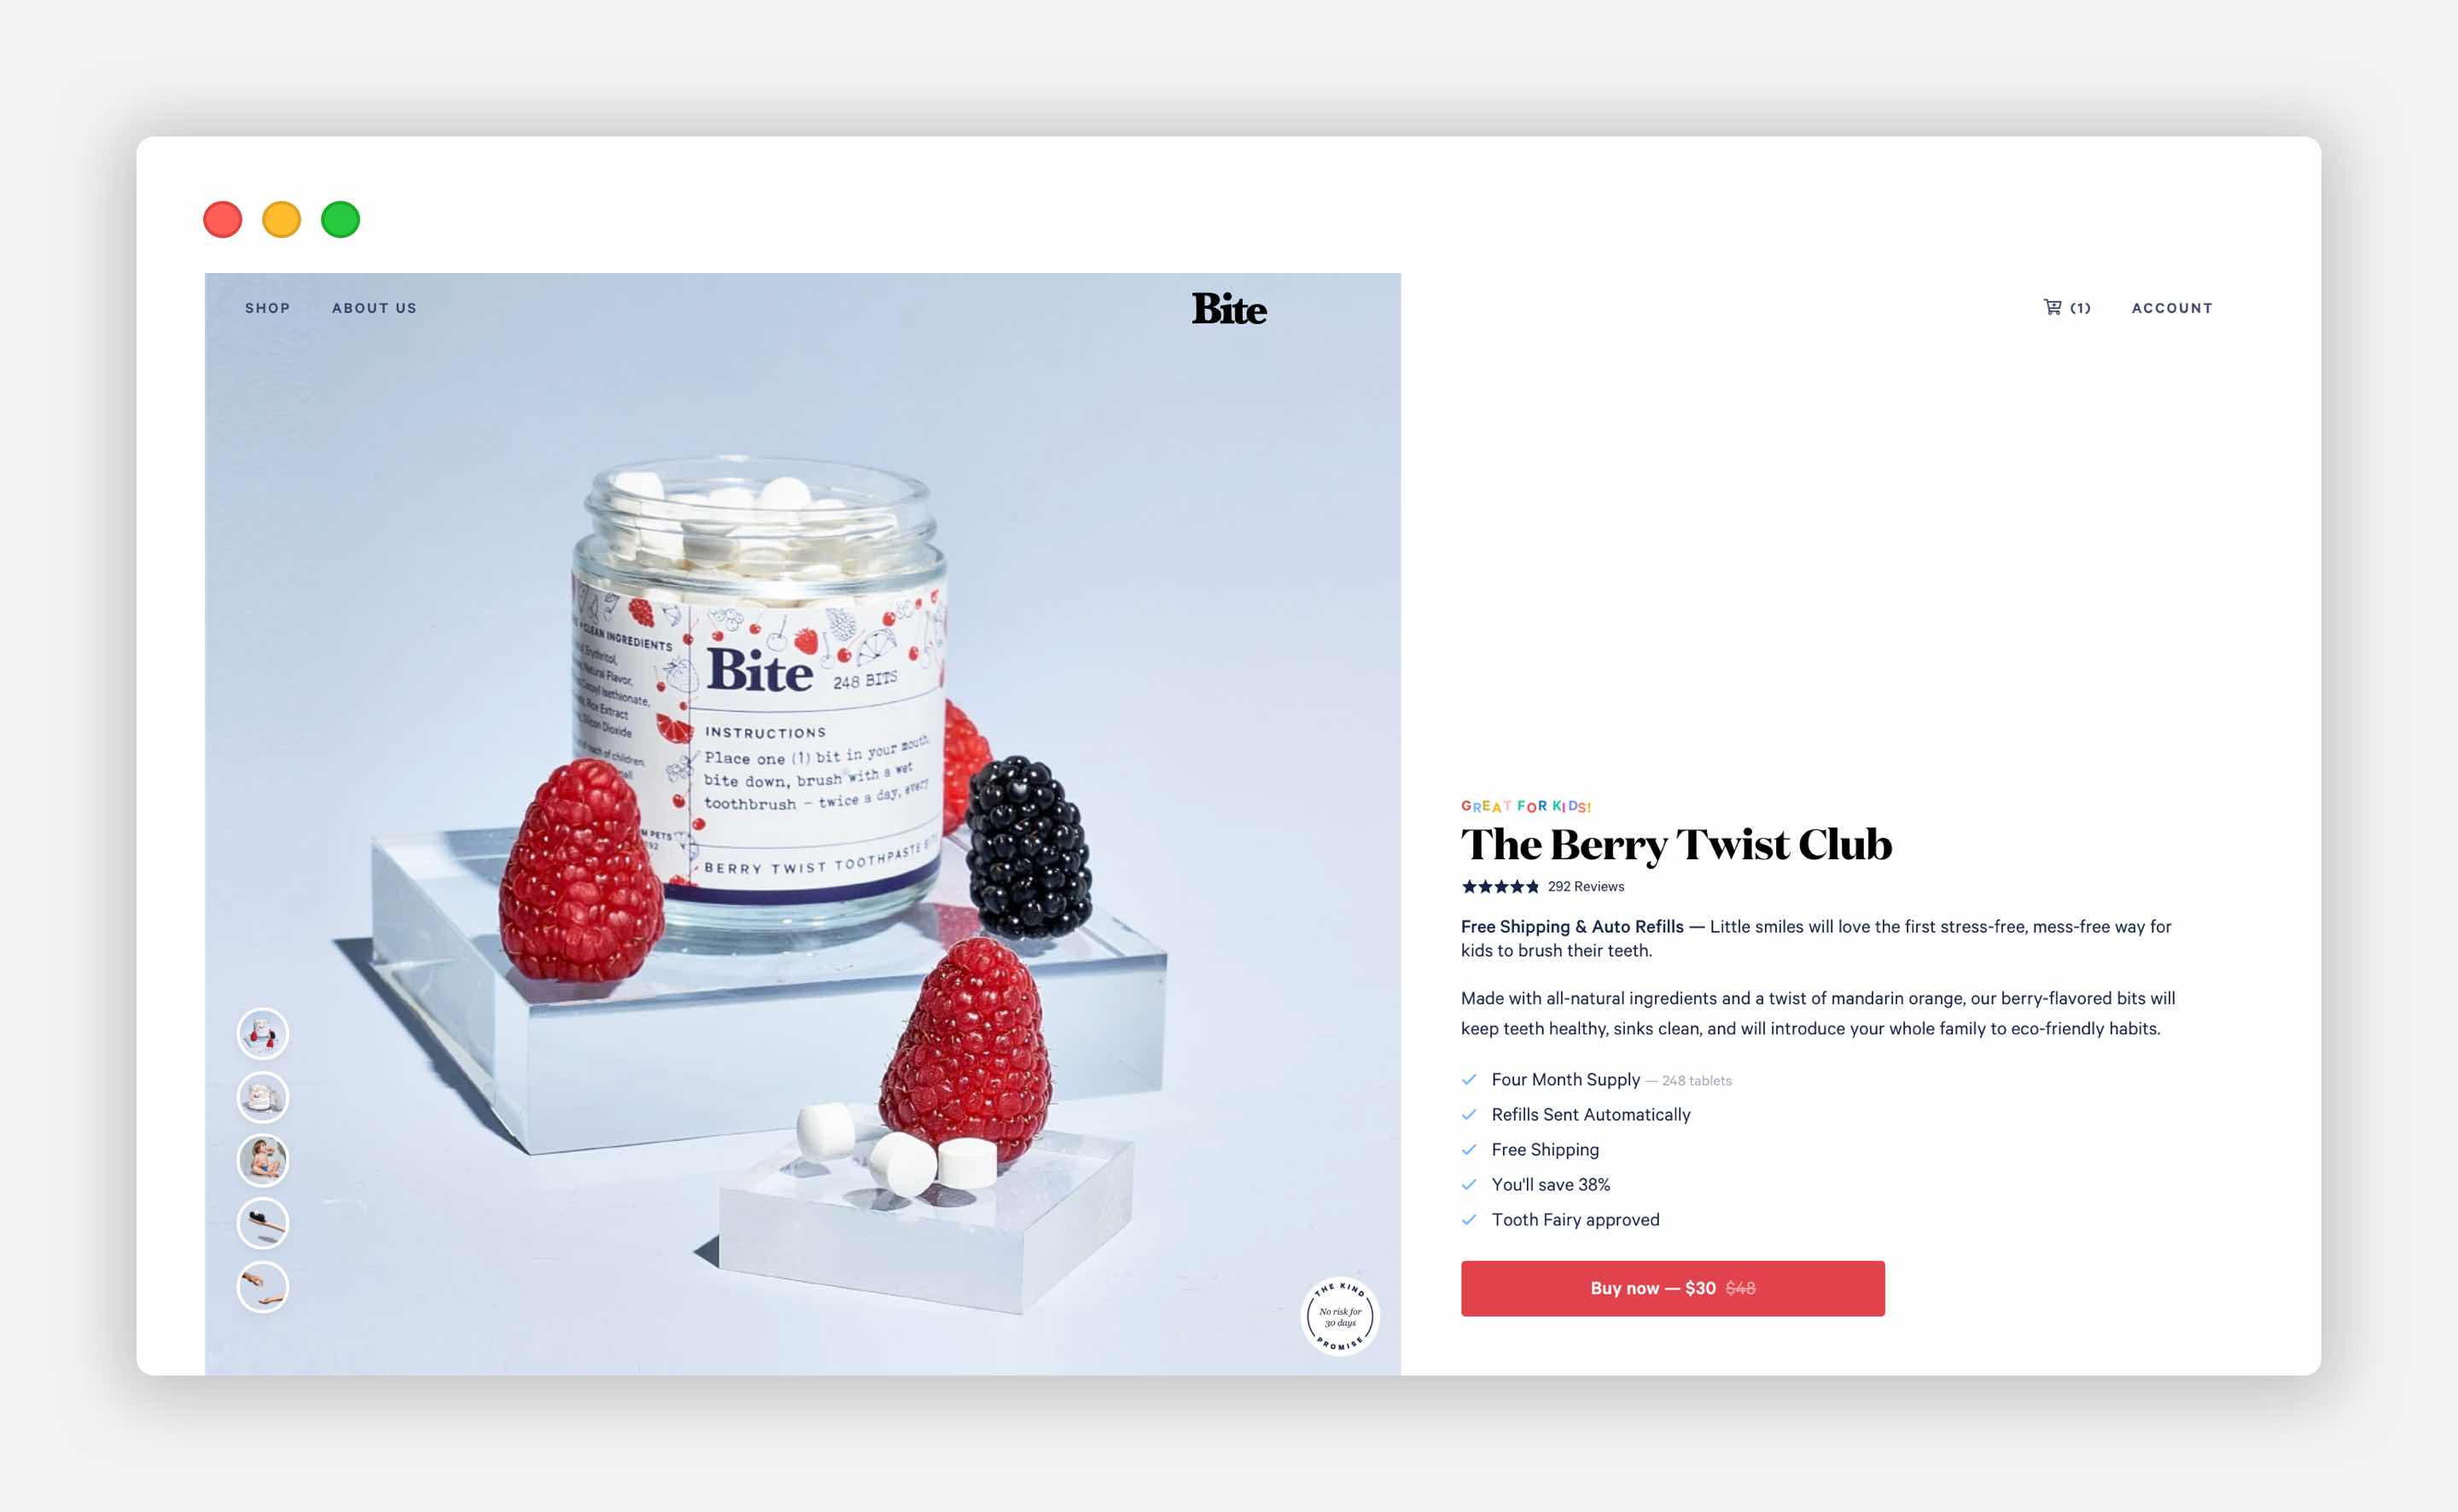 Product image on the product page. The Berry Twist Club by Bite example